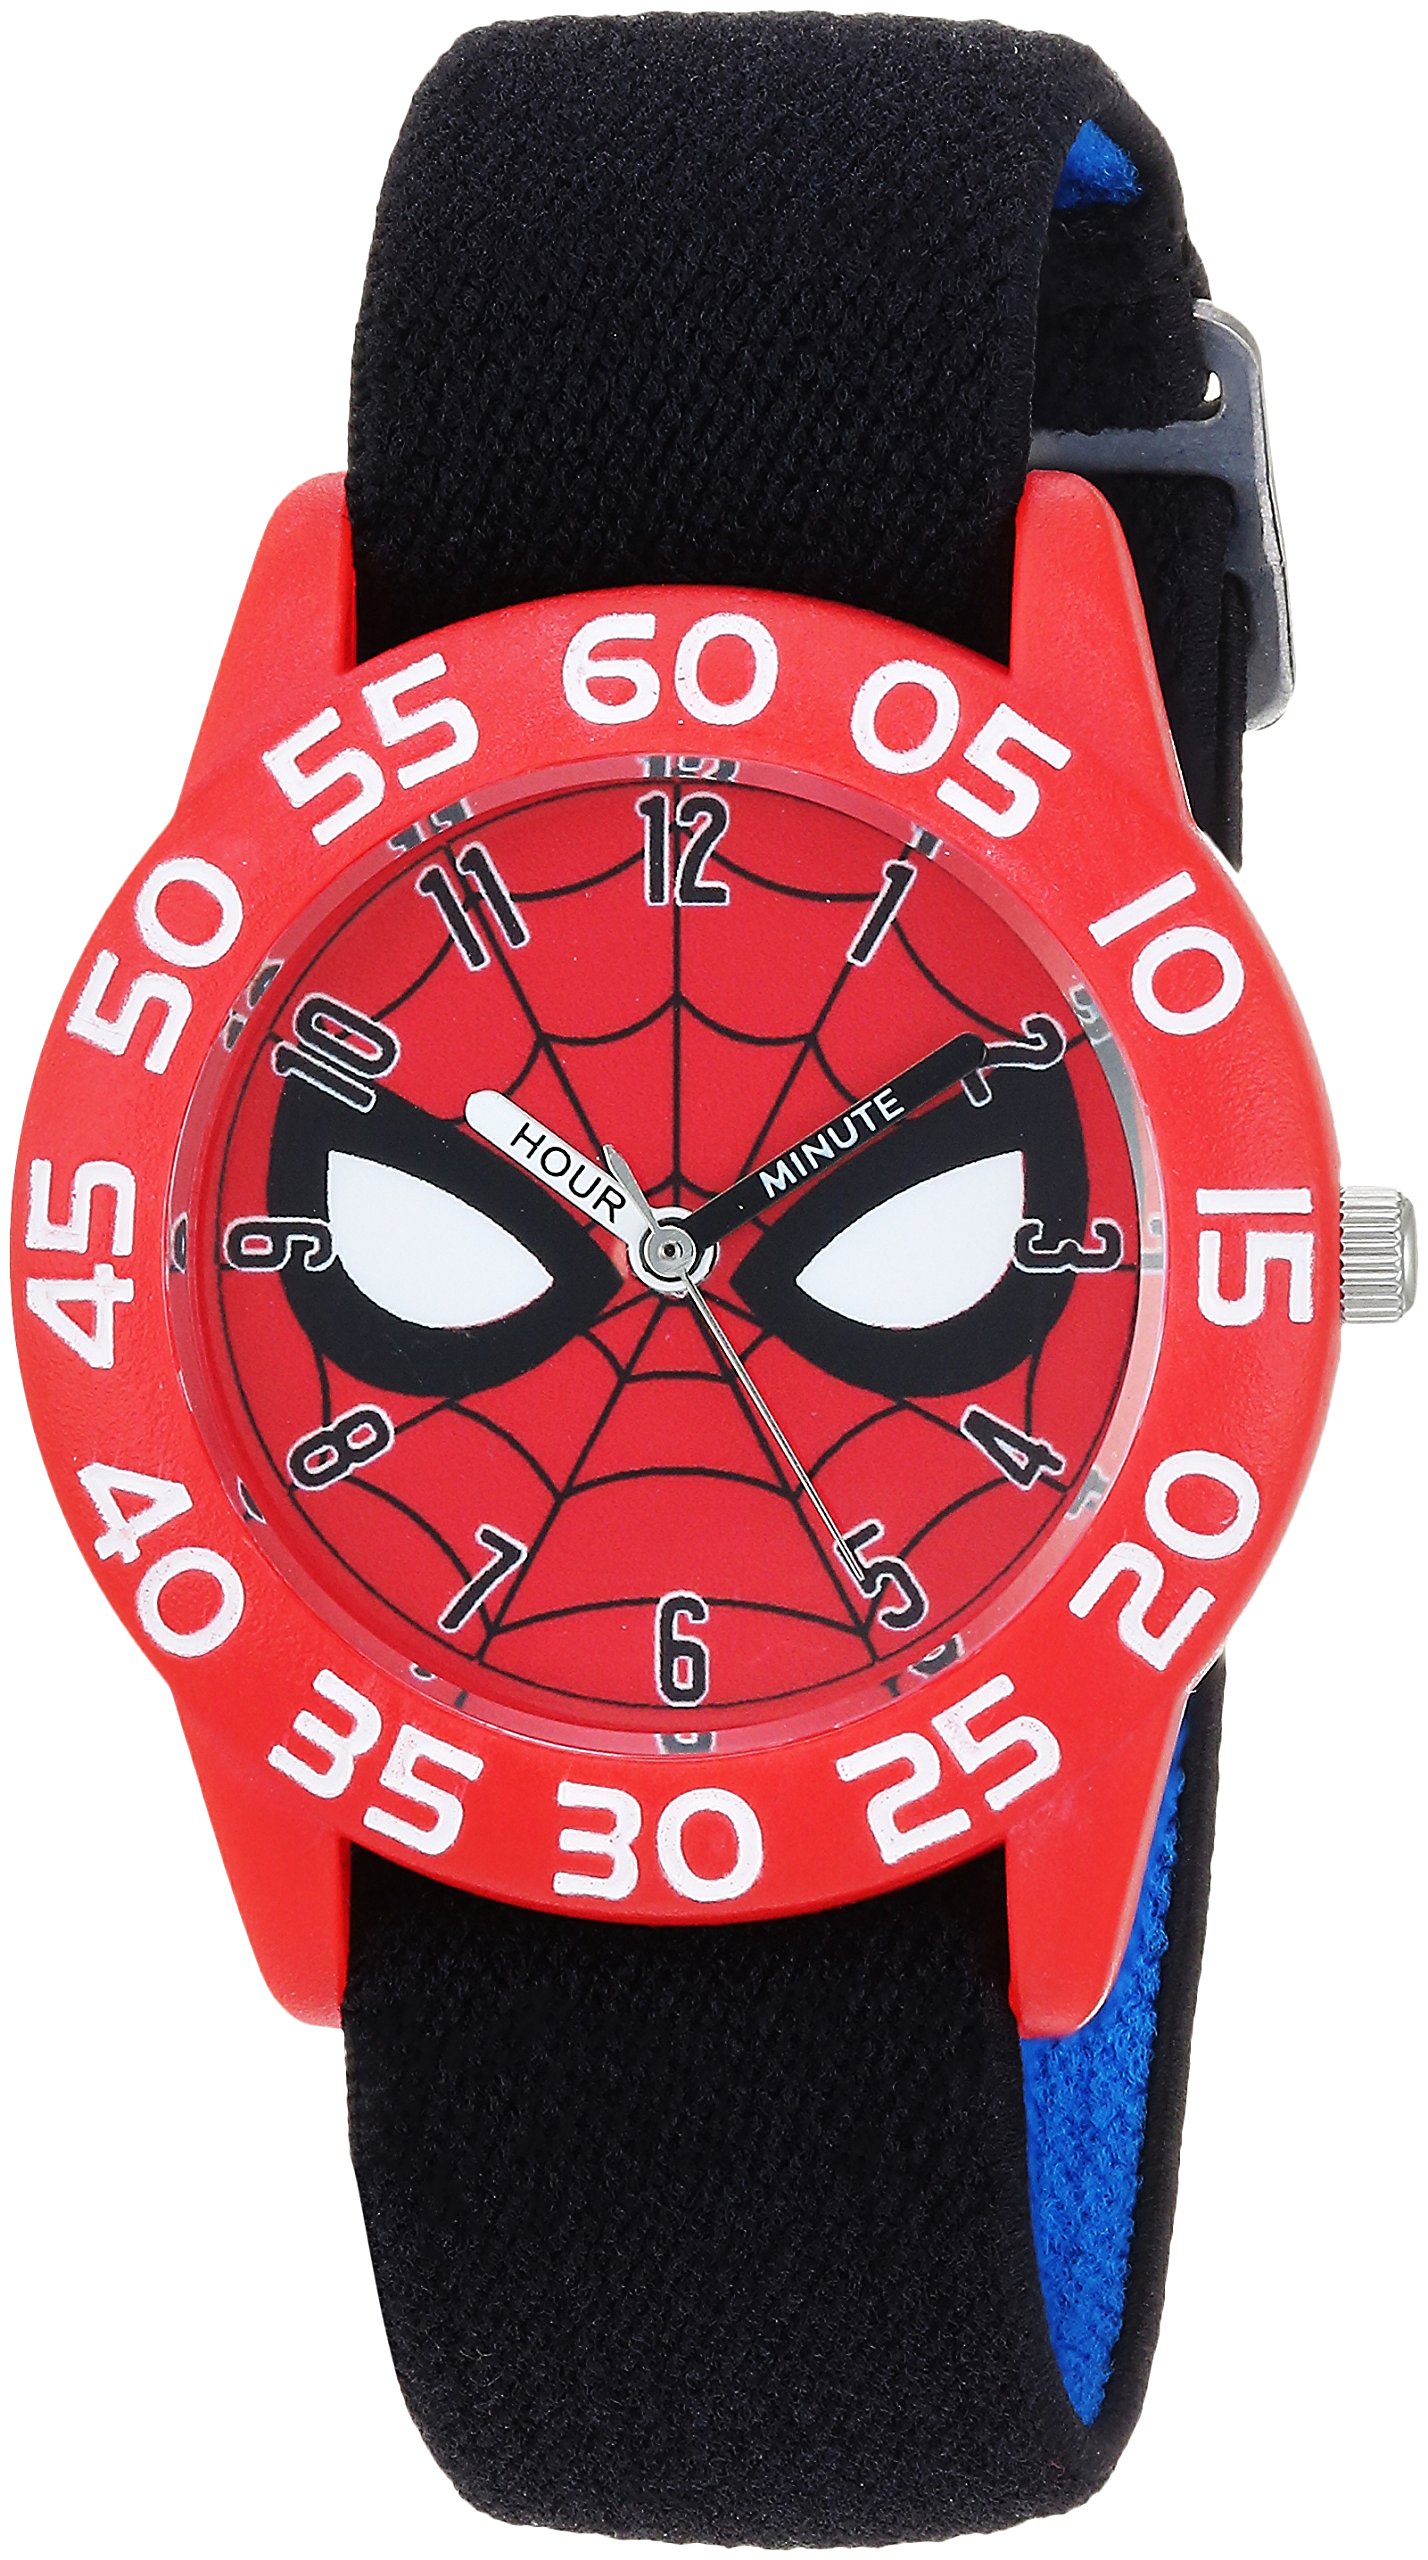 Accutime Kids Marvel Avengers Captain America Spiderman Guardians of The Galaxy Analog Quartz Superhero Time Teacher Watch for Boys, Girls, Toddlers with Hour Minute Markers to Learn How to Read Time